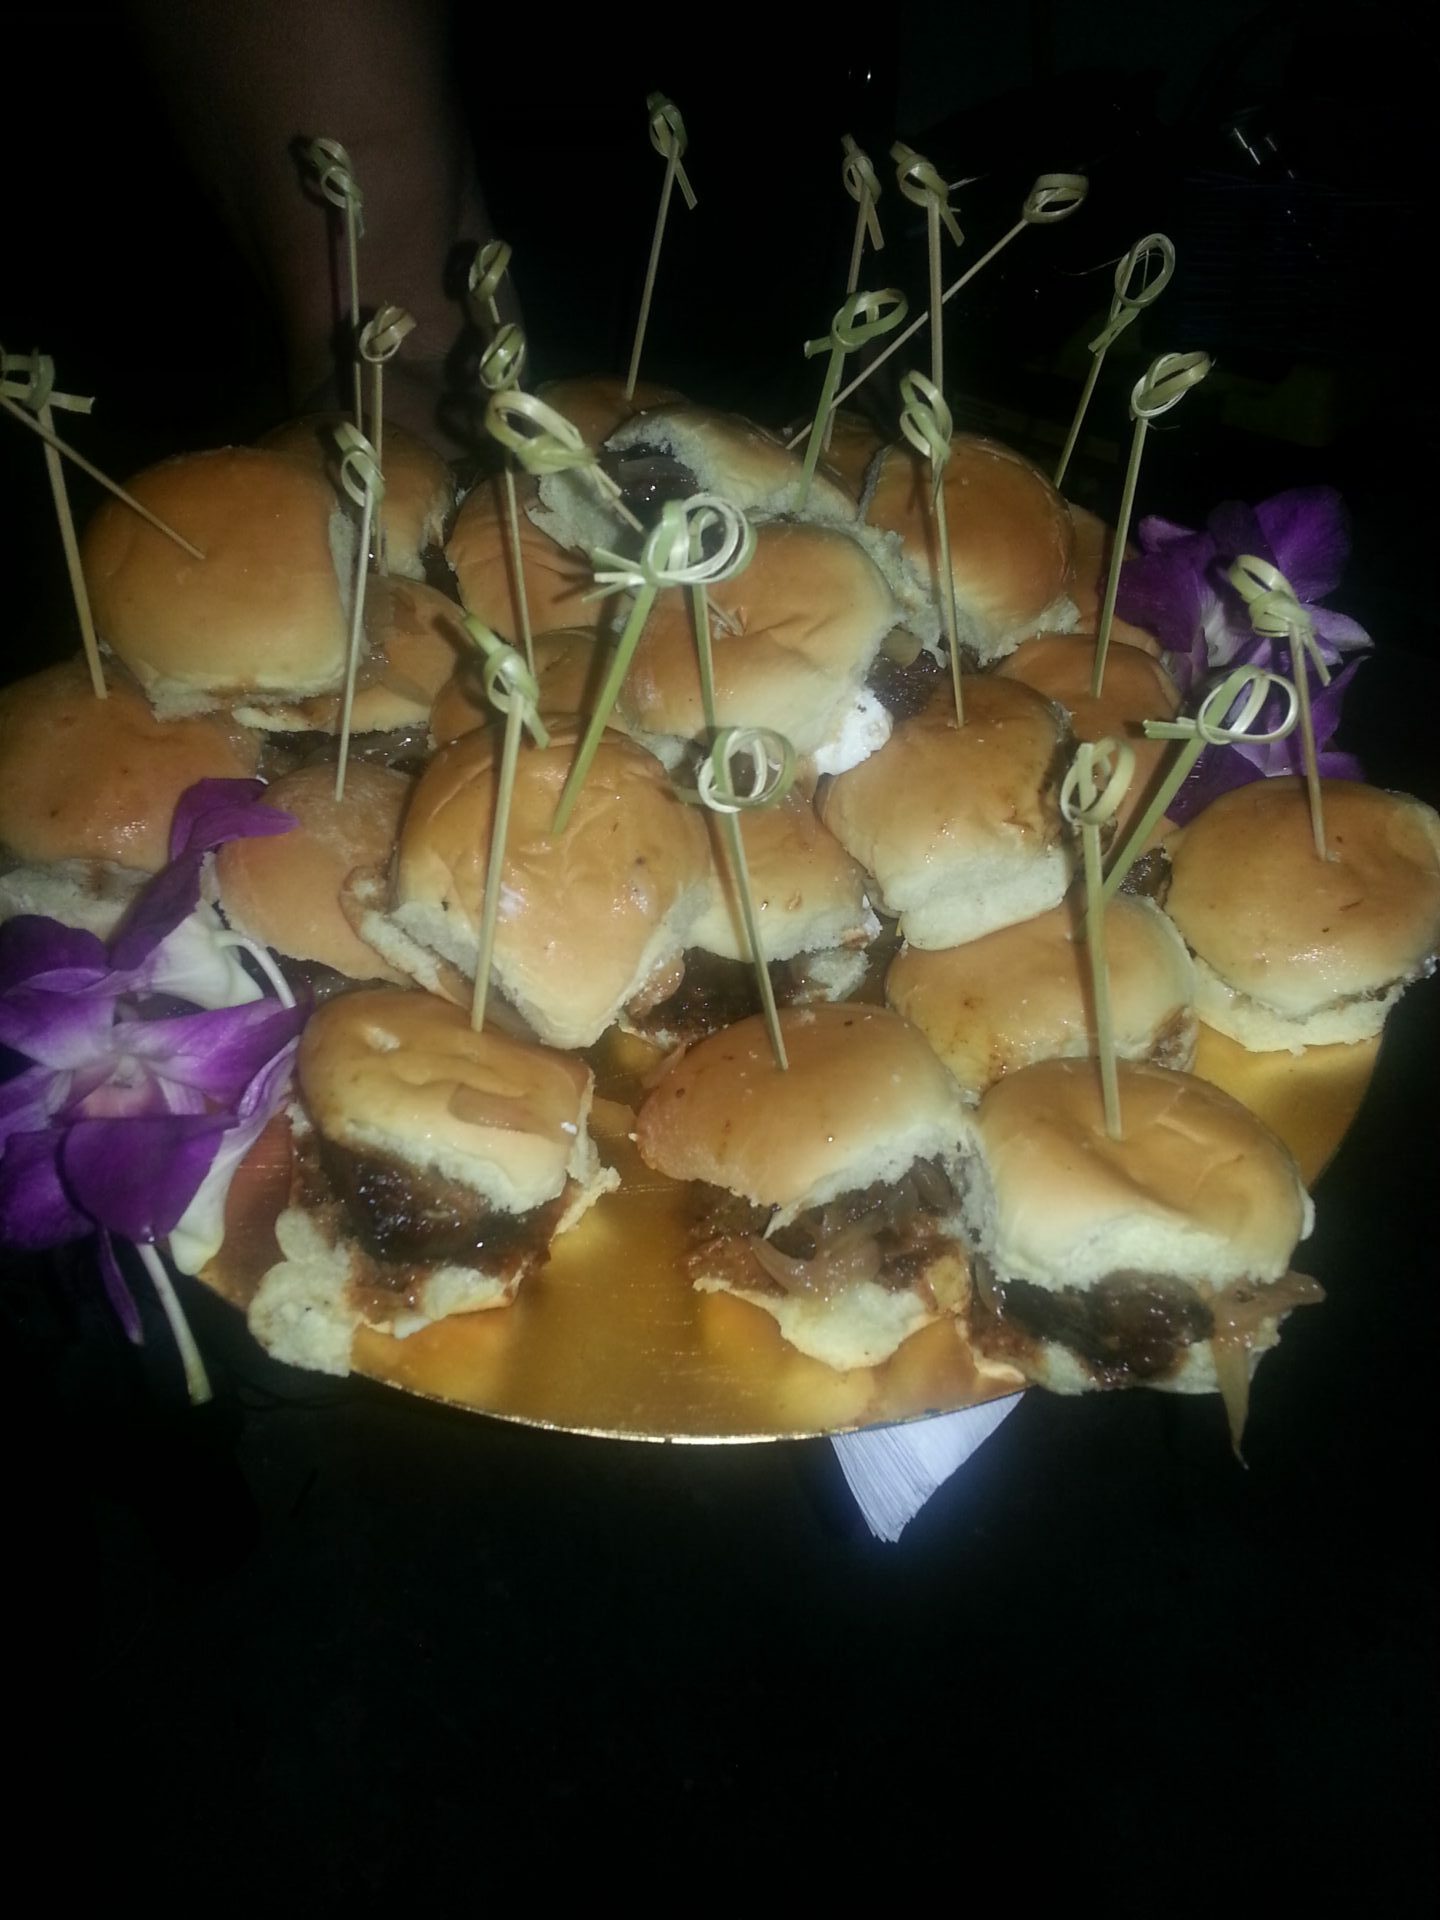 A plate full of slider burgers with picks holding each individual burger together